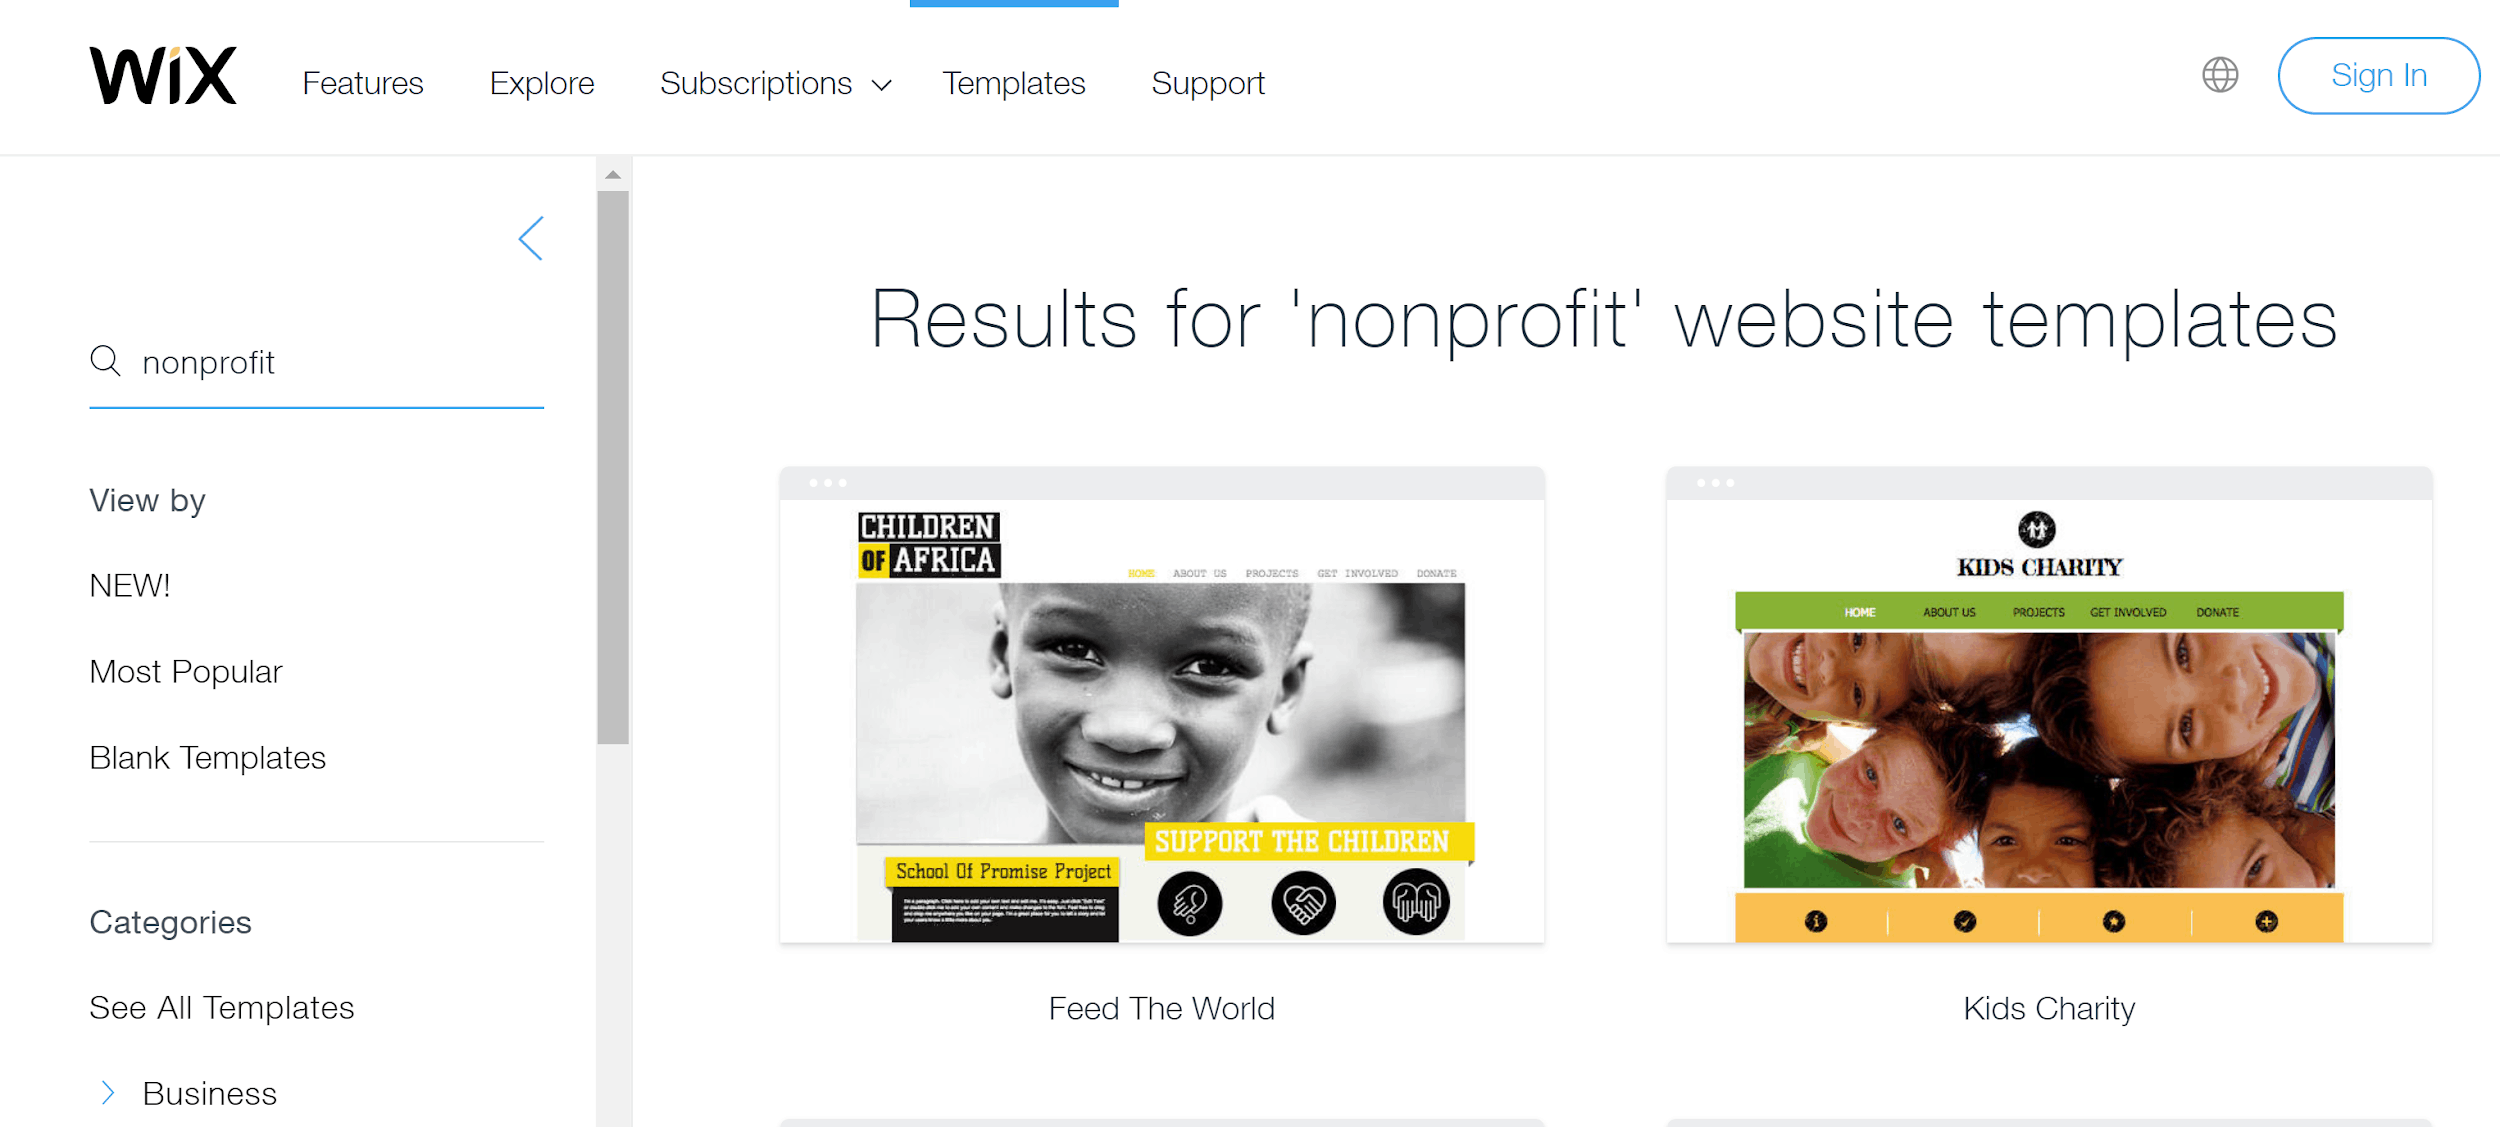 Best Free Online Tools for Nonprofits-image1